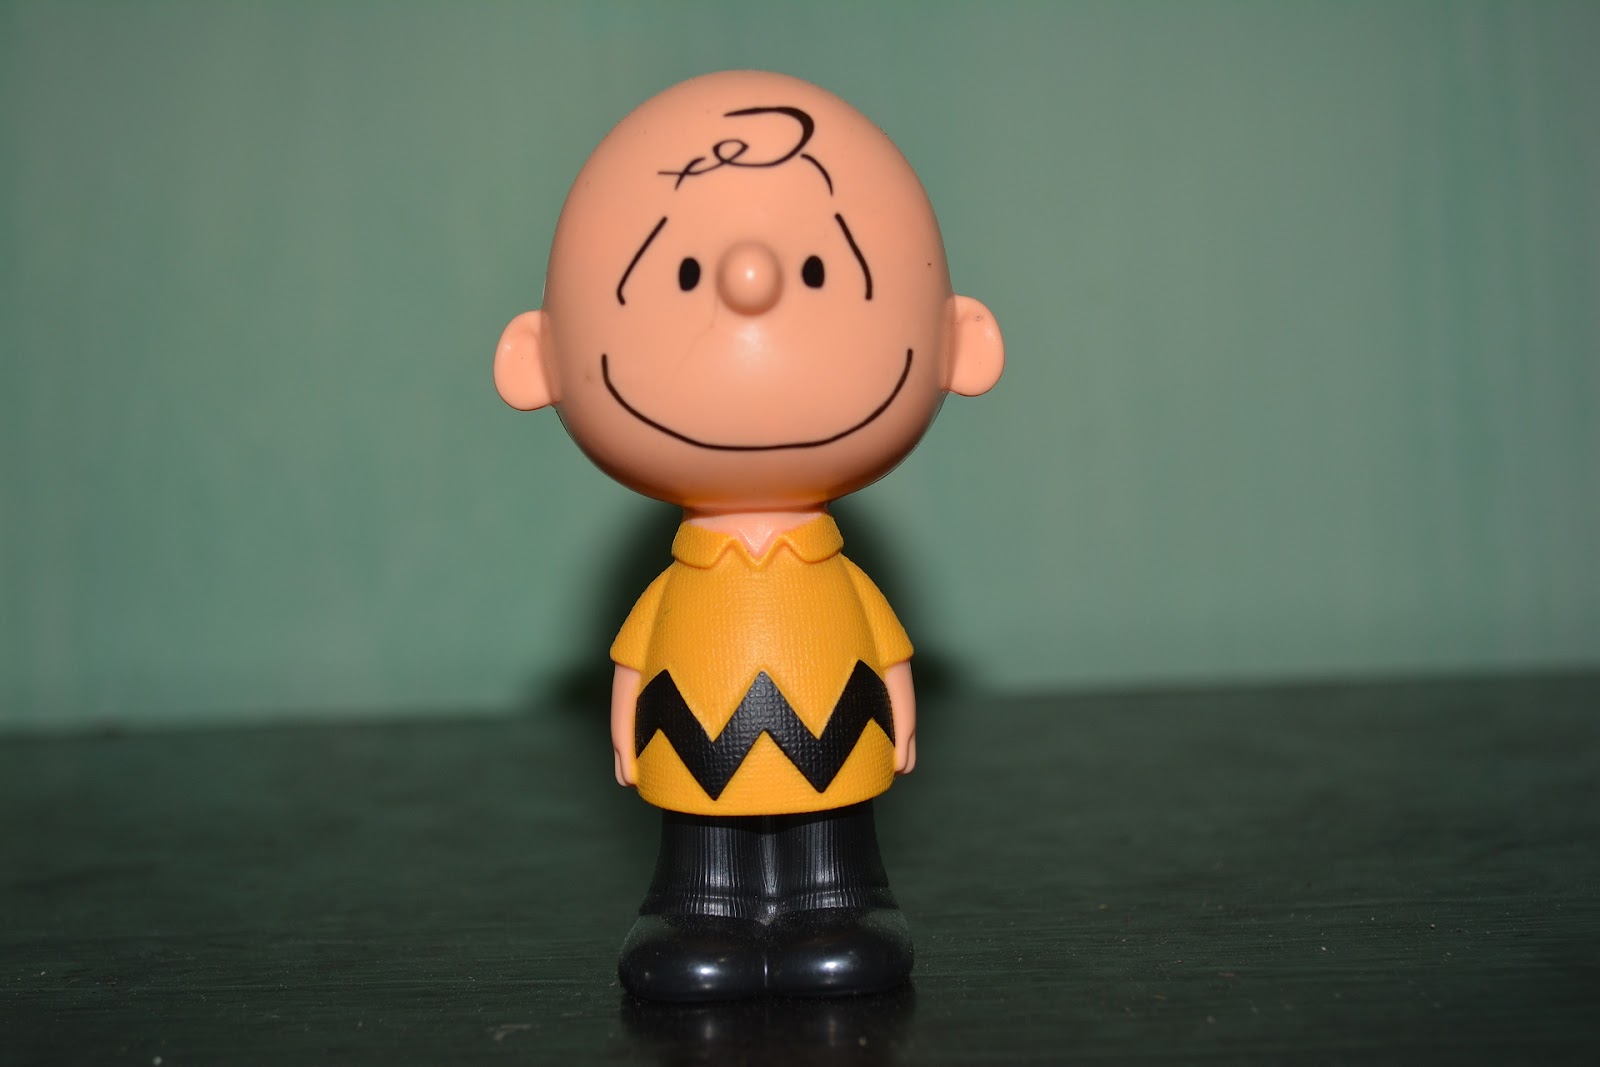 An image of a Charlie Brown doll.